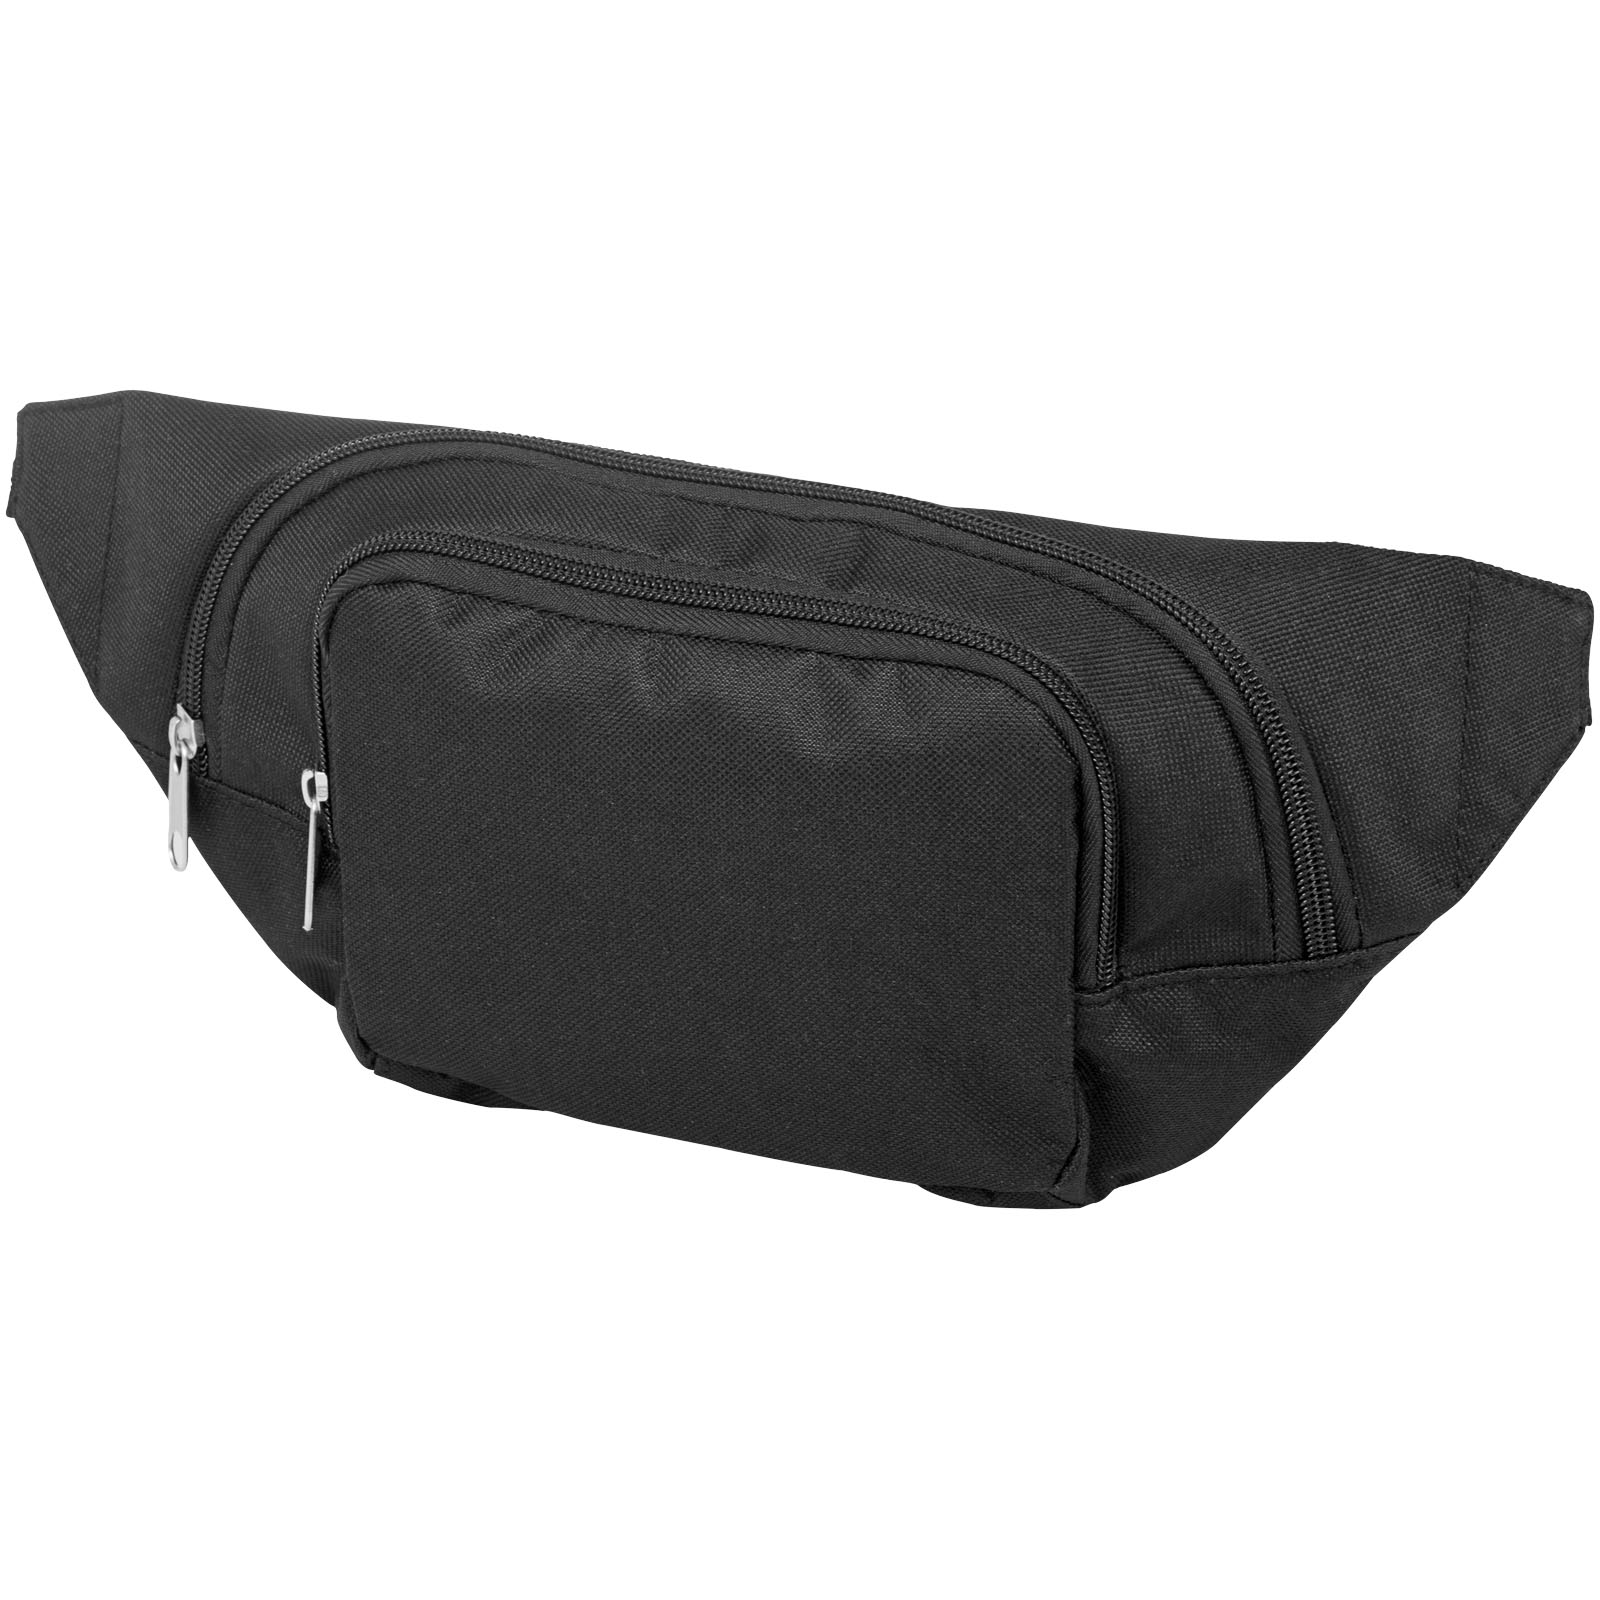 Advertising Travel Accessories - Santander fanny pack with two compartments - 0